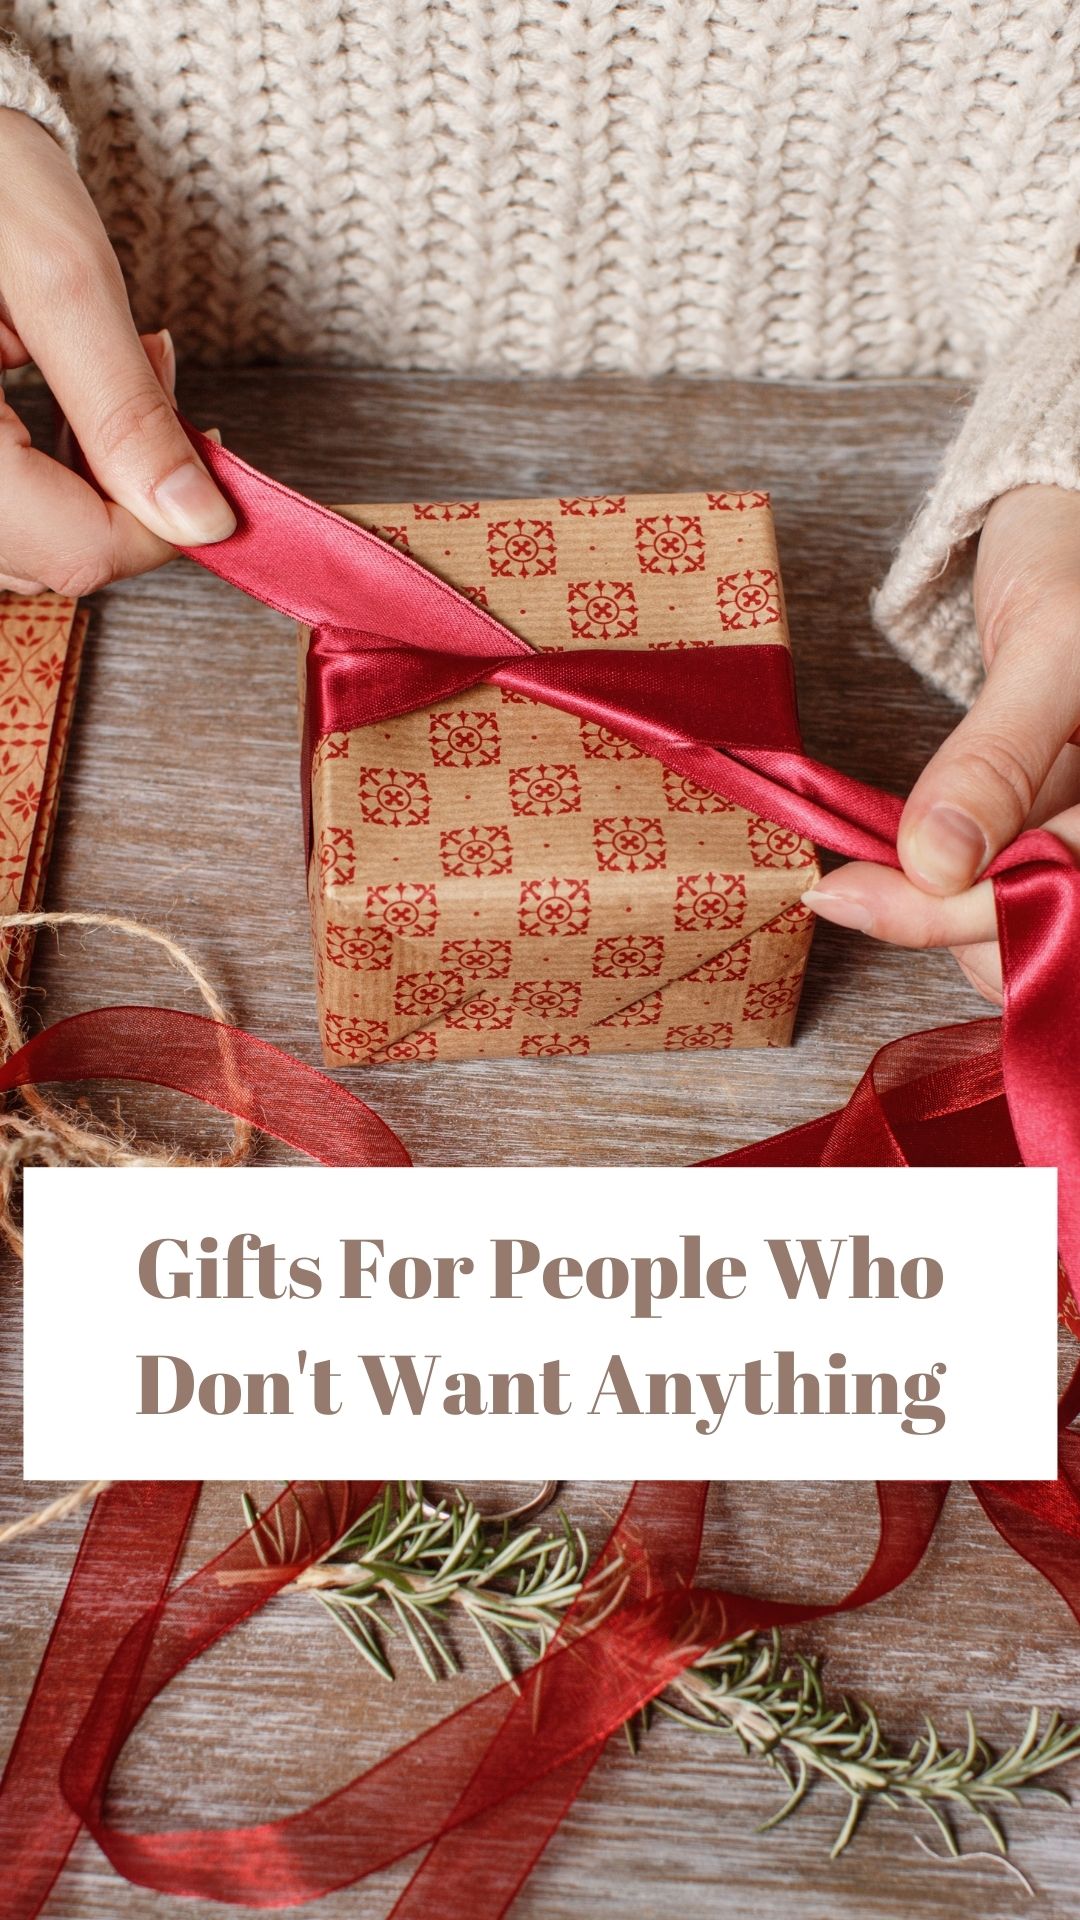 gifts for people who don't want anything